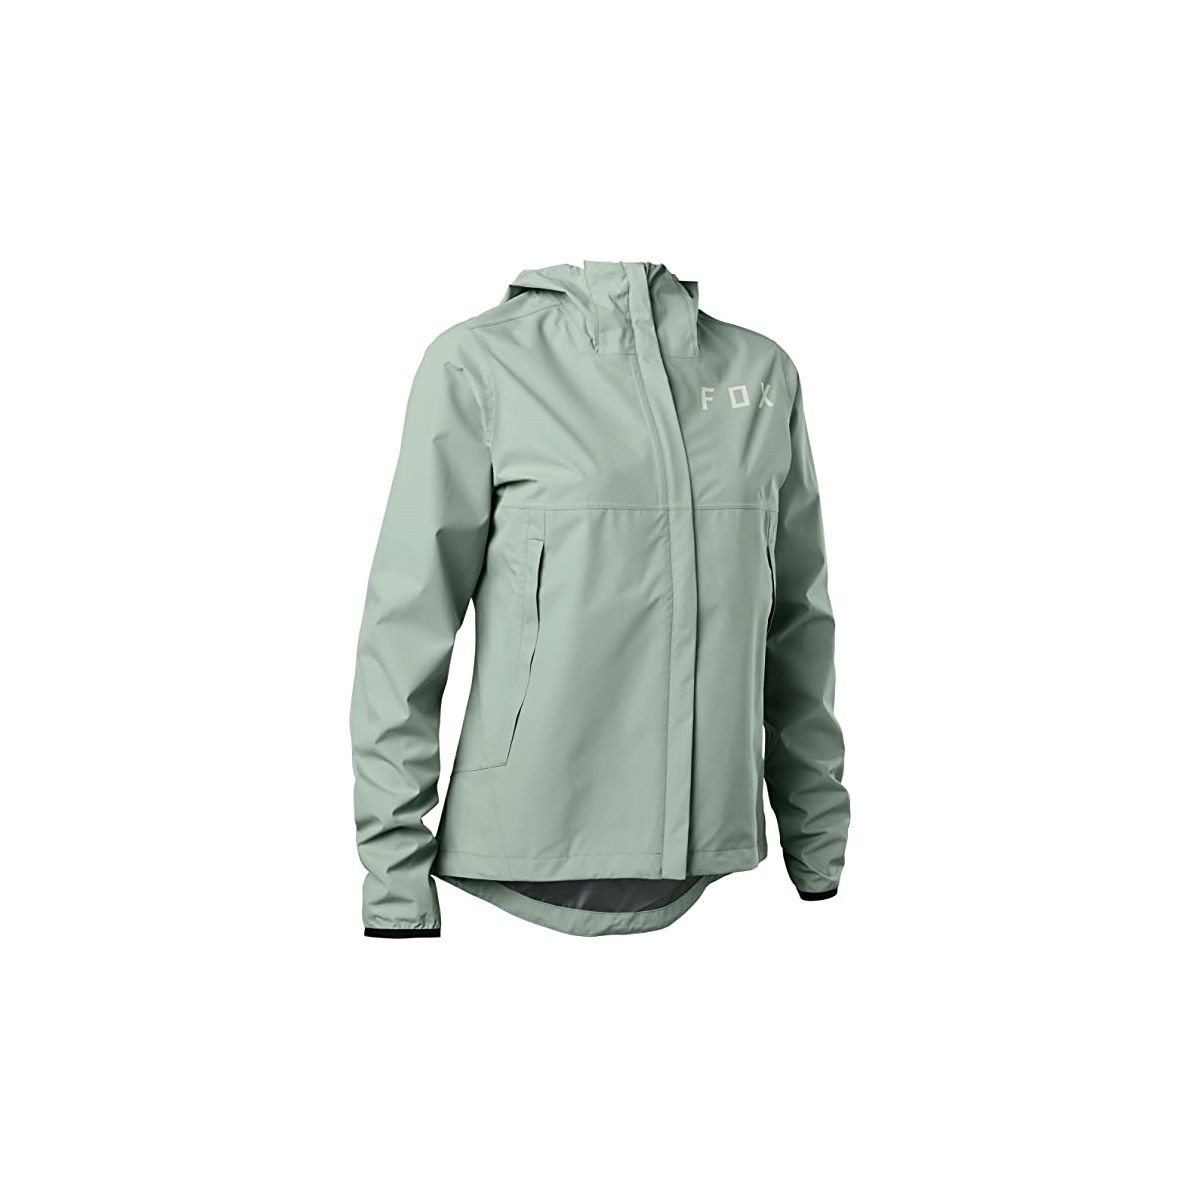 Chaqueta impermeable Fox Ranger 2.5L mujer color verde